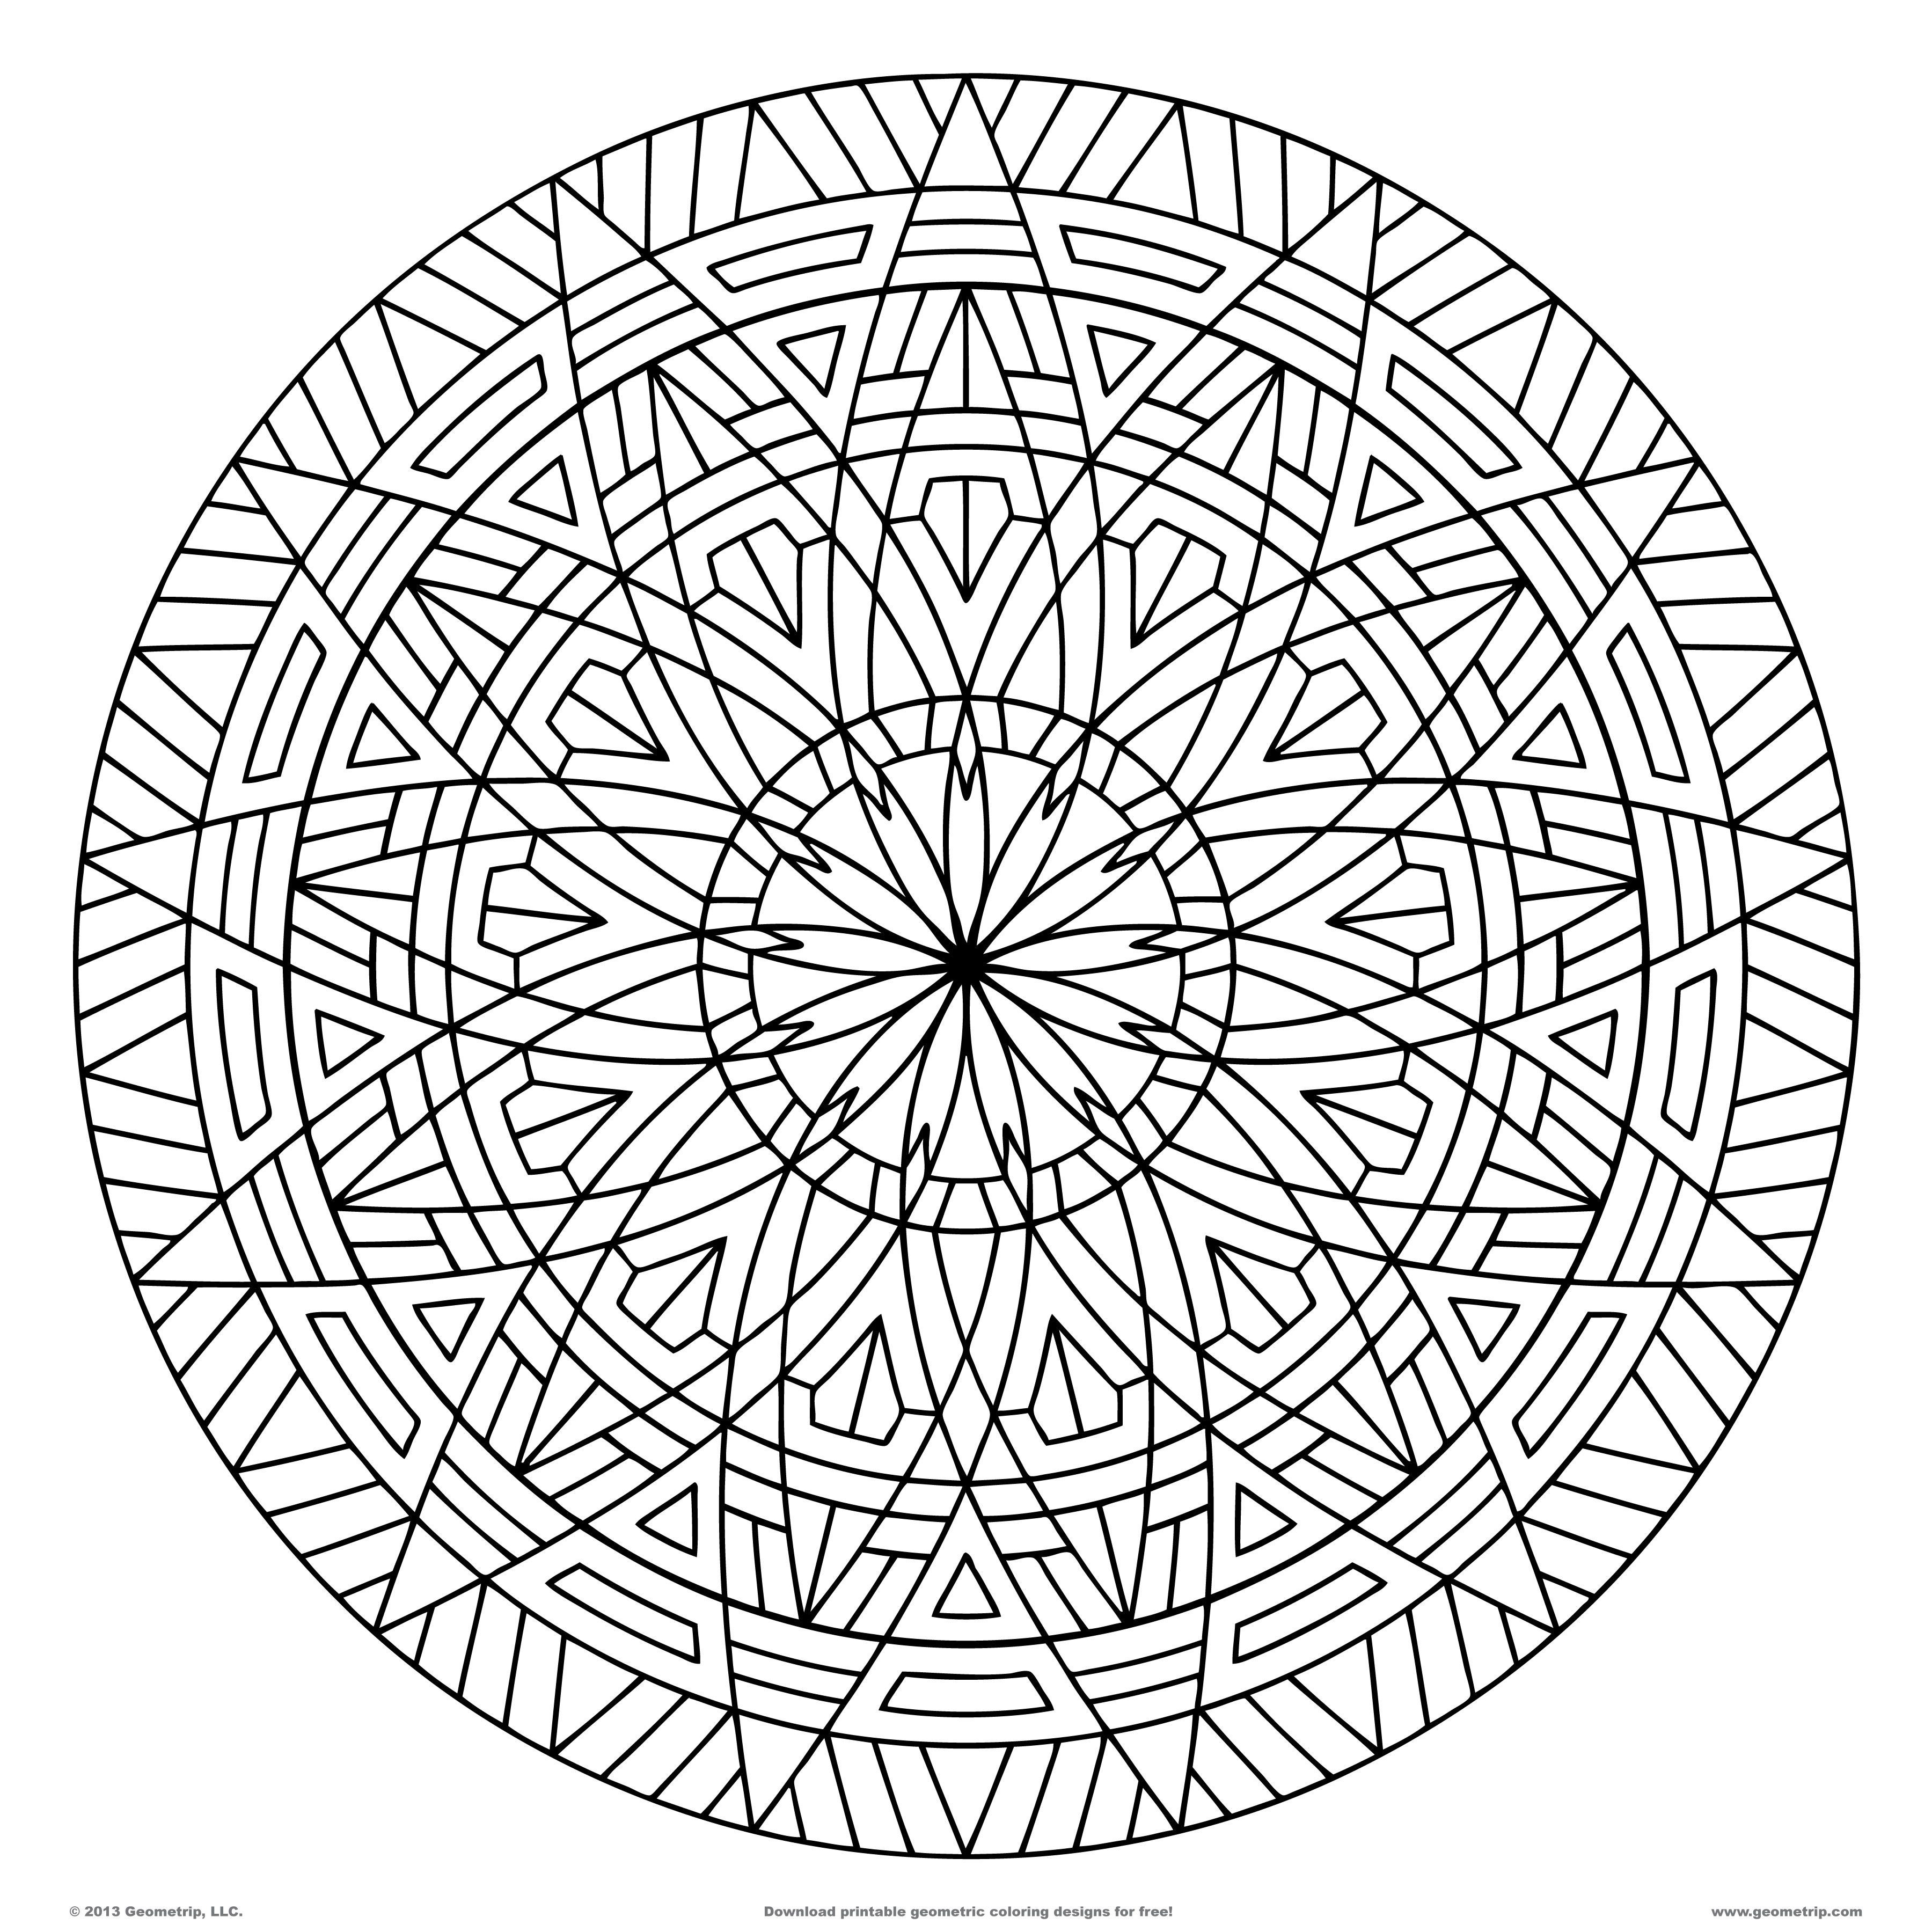 Geometric Coloring Page Pattern Coloring Pages For Adults Coloring Home For Coloring